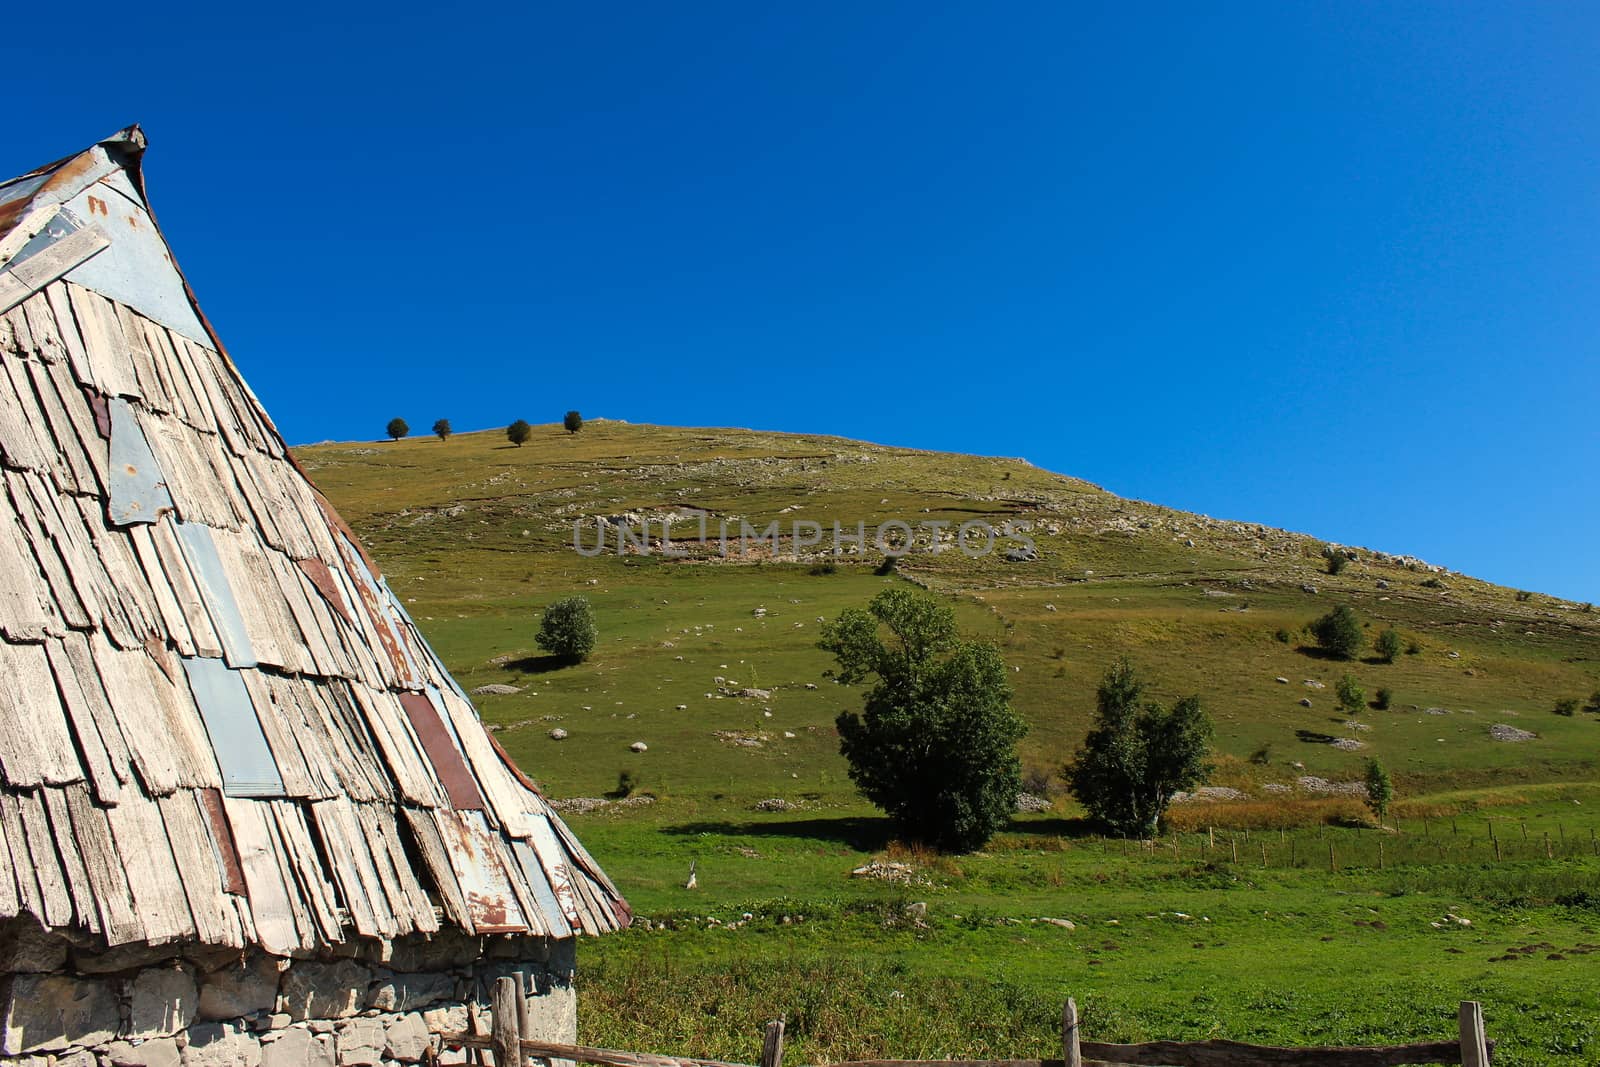 Part of the house and the roof of a Bosnian house with a view of the hill behind, in the old Bosnian village of Lukomir on the Bjelasnica mountain. by mahirrov